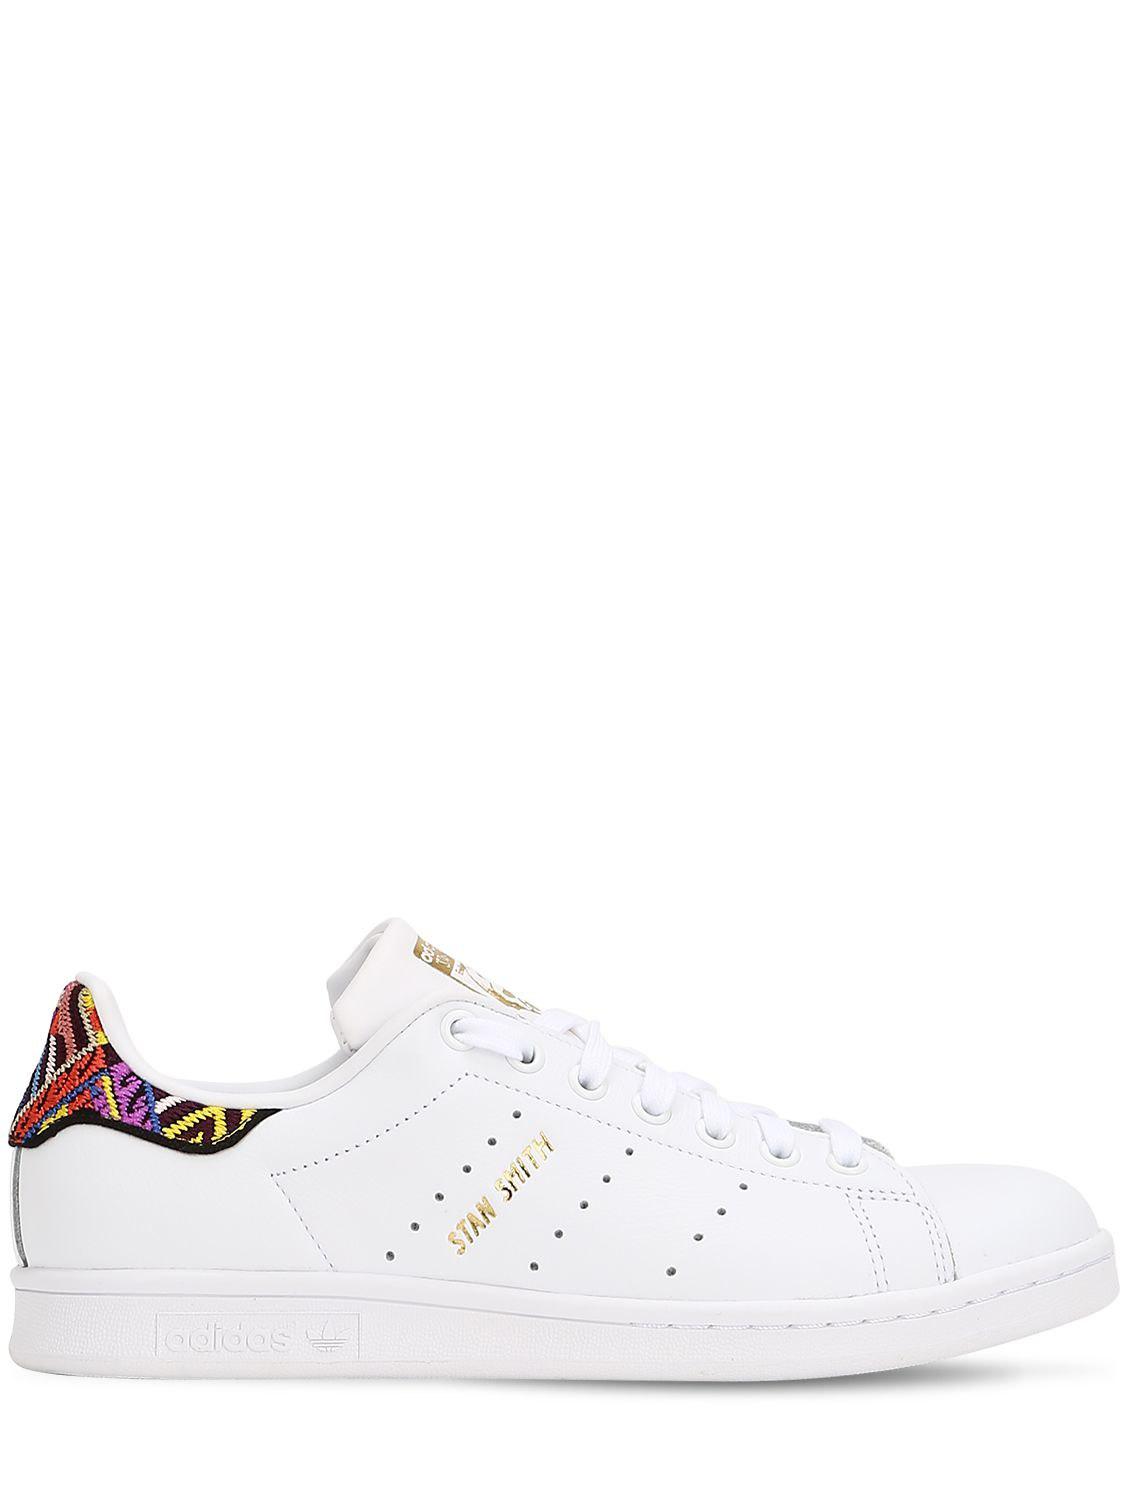 stan smith aztec adidas Sale | Deals on Shoes, Clothing & Accessories